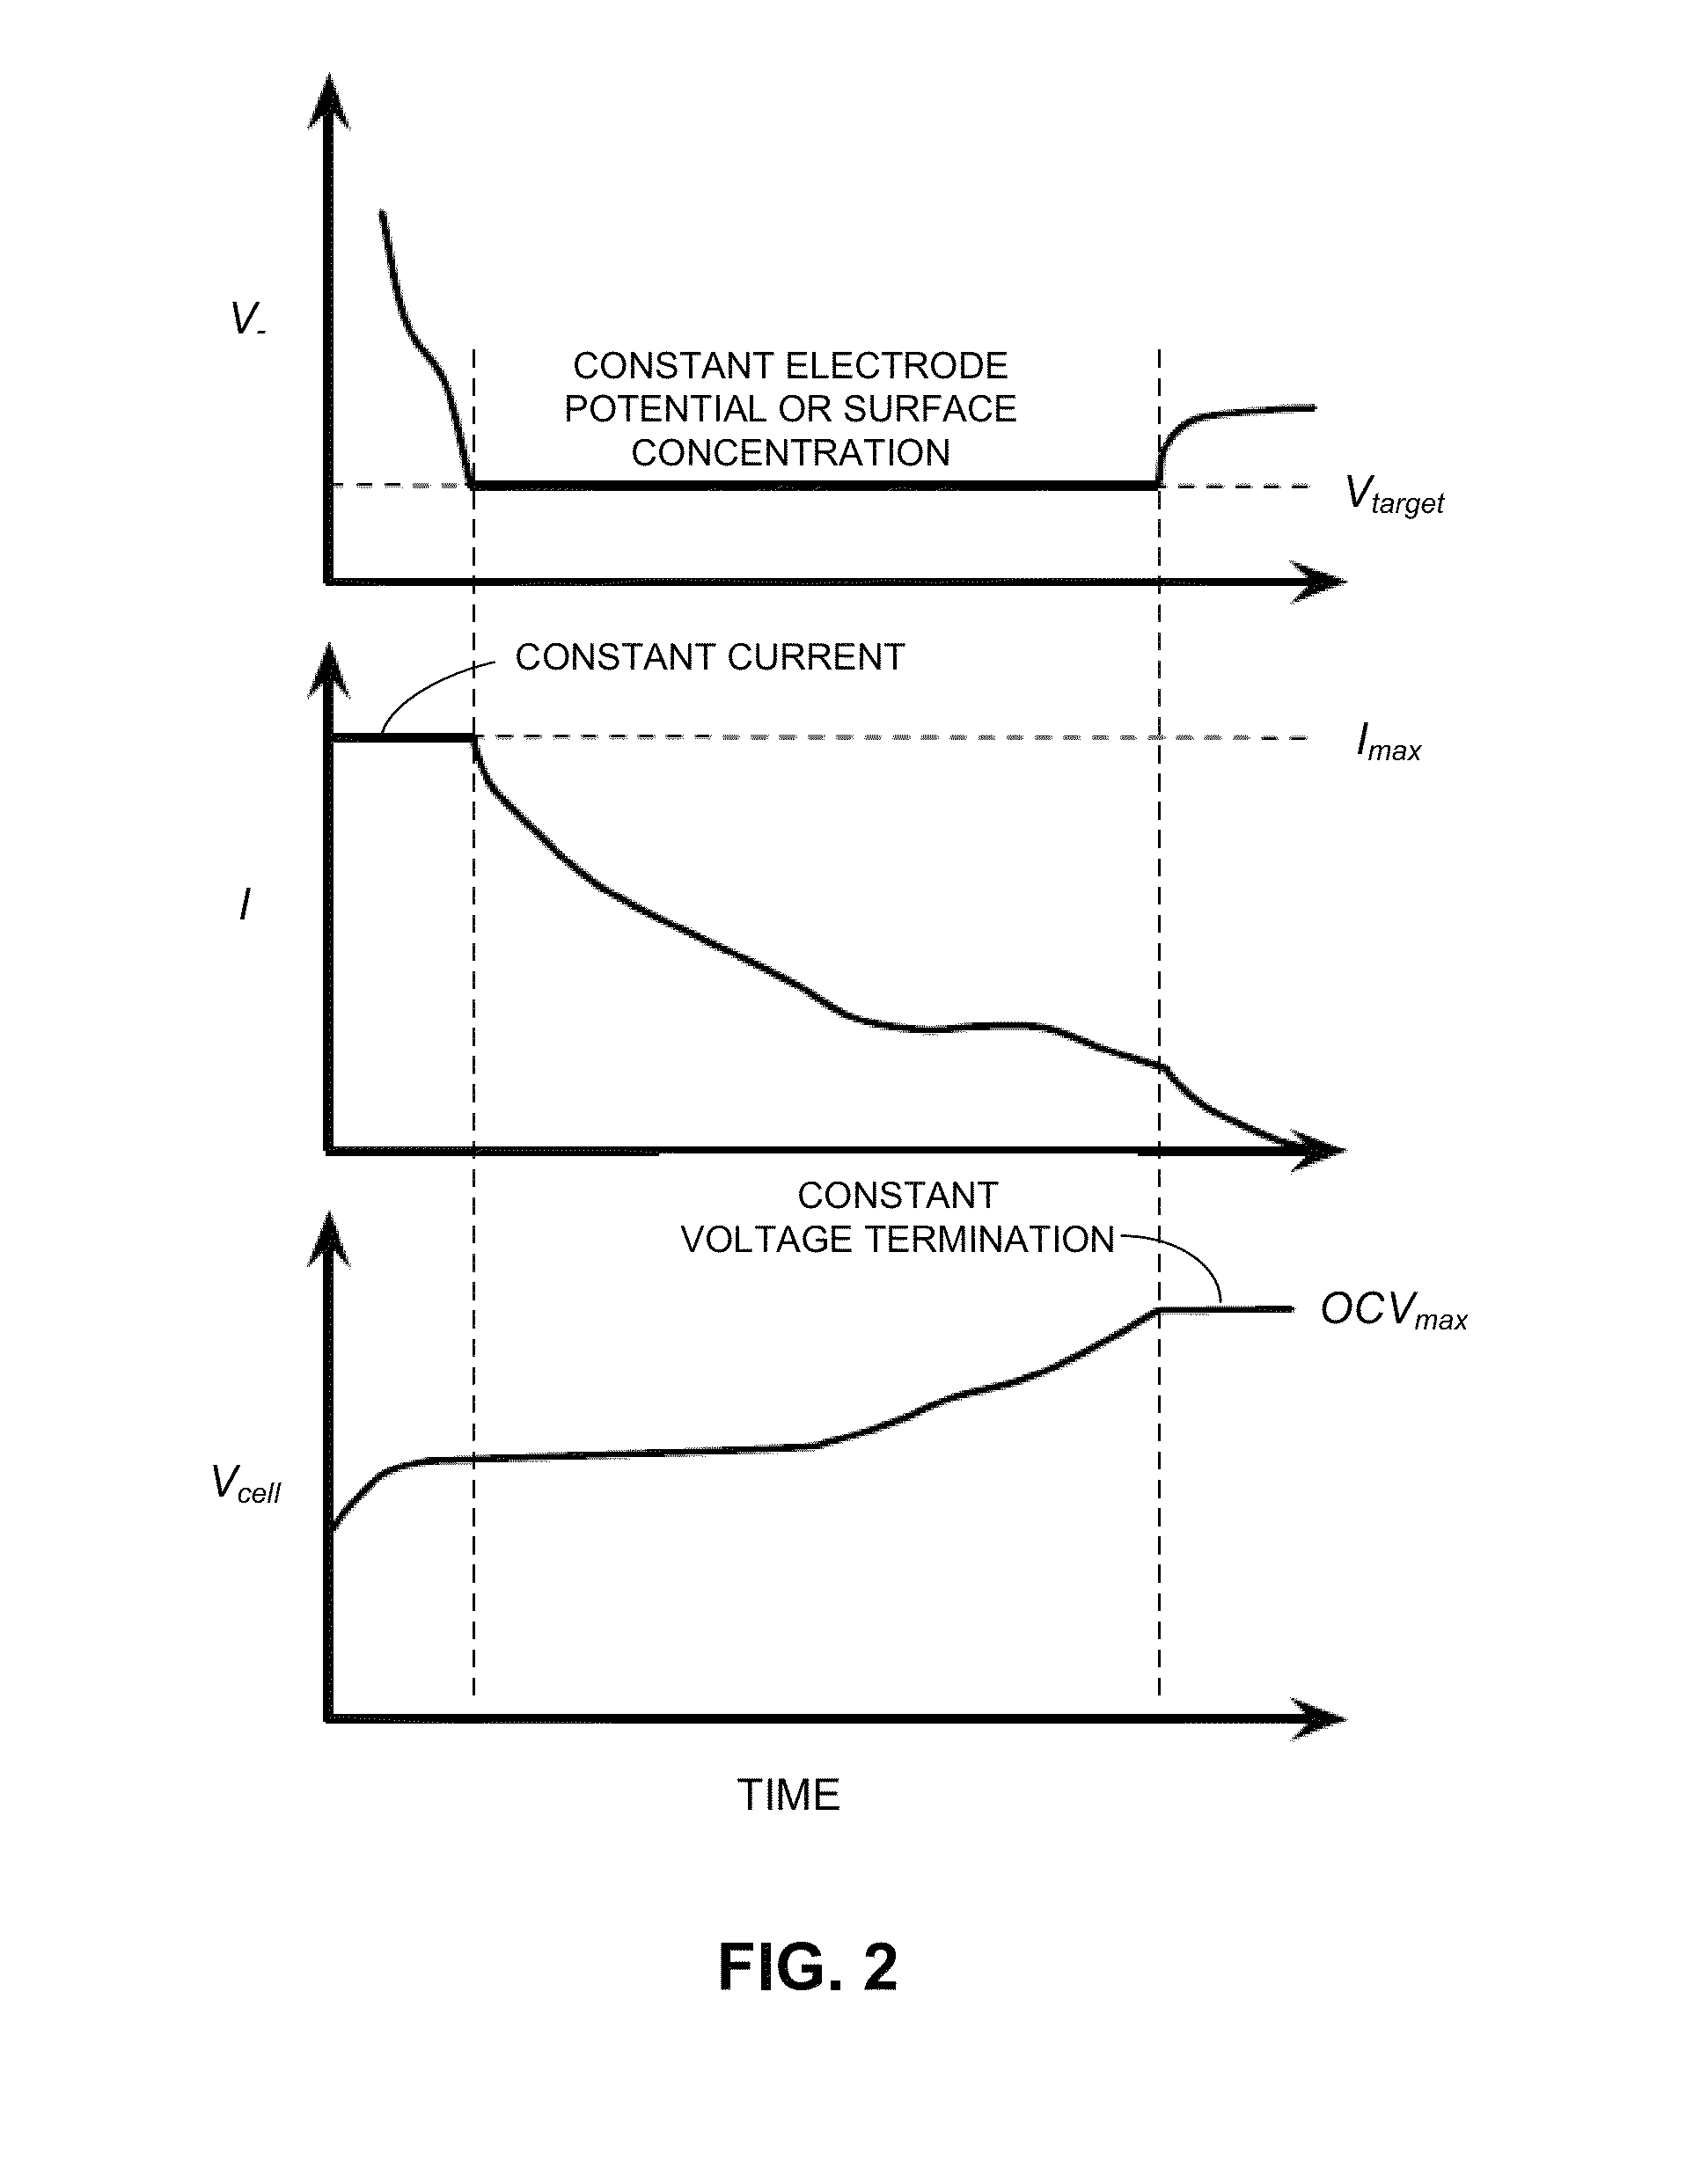 Controlling battery charging based on current, voltage and temperature